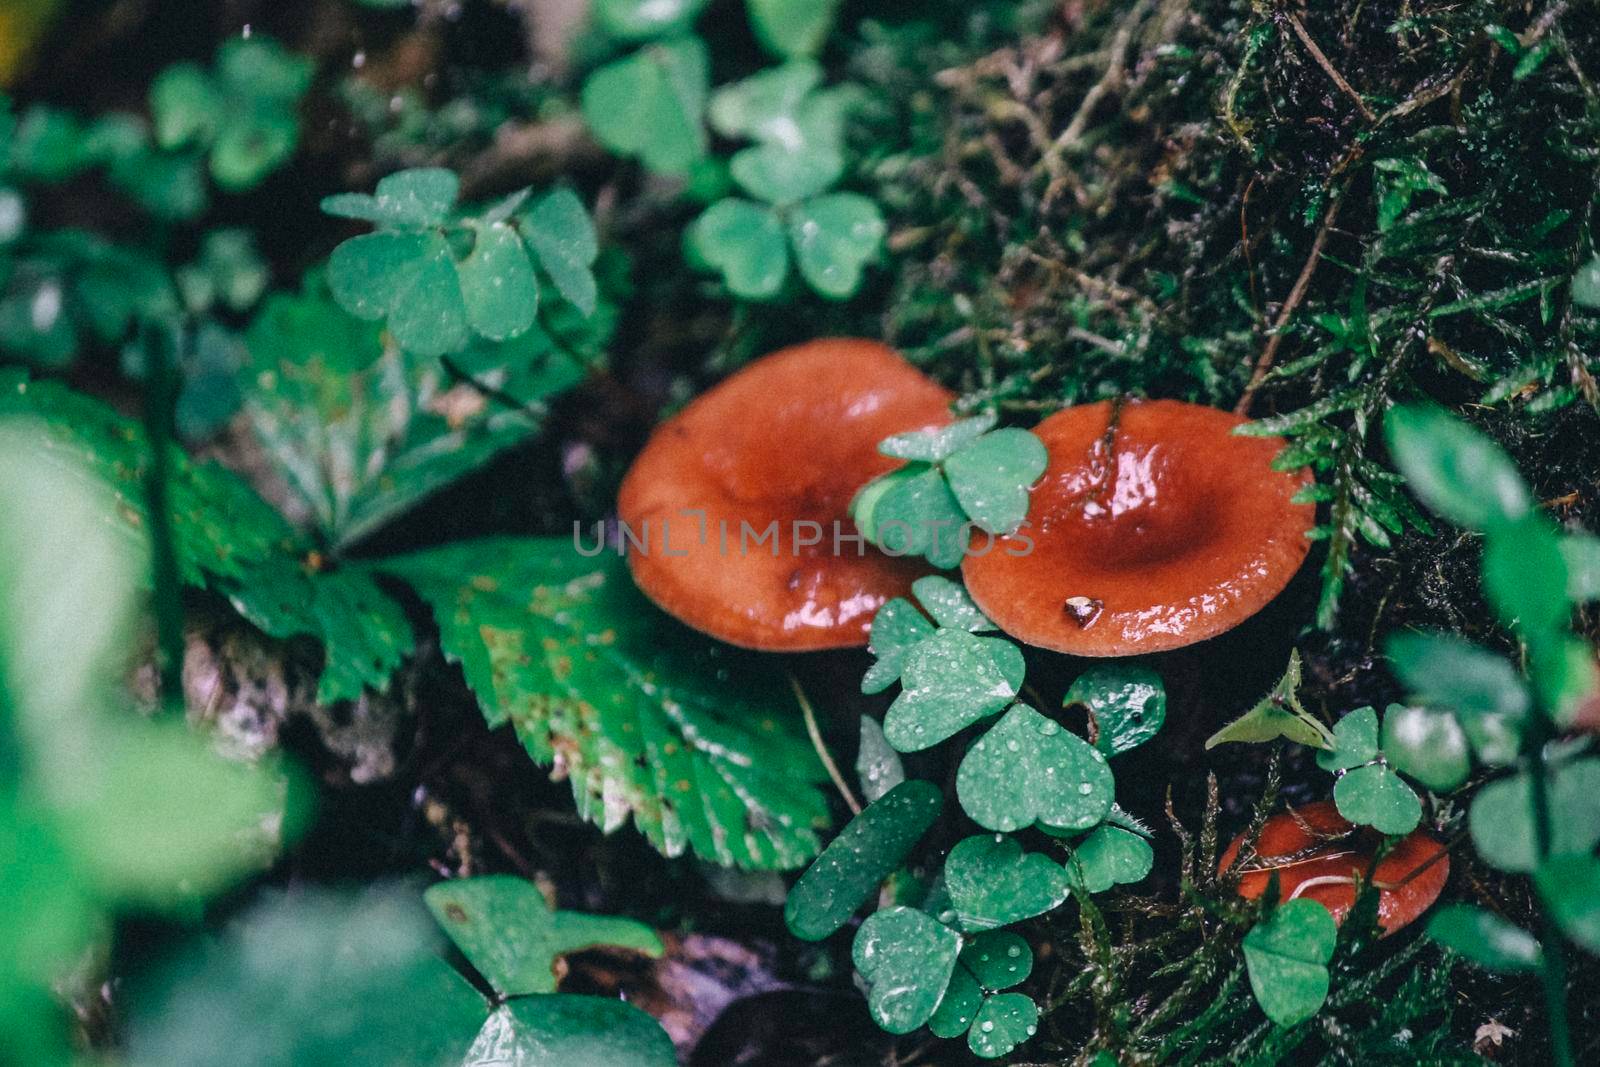 Two russula mushrooms growing between the blades of clover by grekoni